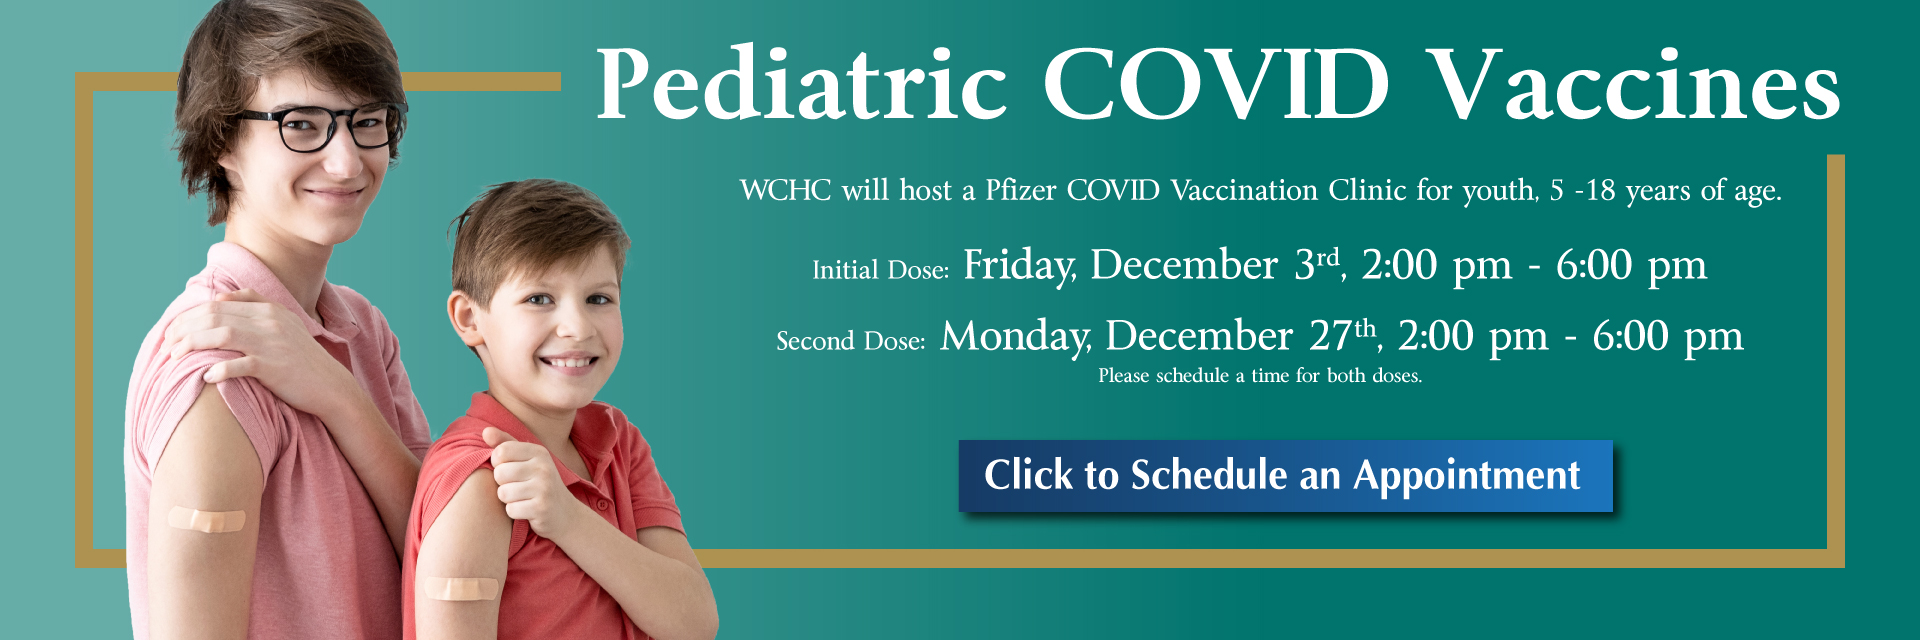 Banner picture of two young boys lifting their sleeves up to their shoulders and showing their band-aides from the Covid Vaccine. Banner says:
Pediatric COVID Vaccines
WCHC will host a Pfizer COVID Vaccination Clinic for youth, 5-18 years of age.

Initial Dose: Friday, December 3rd, 2:00 pm - 6:00 pm
Second Dose: Monday, December 27th, 2:00 pm - 6:00 pm
Please schedule a time for both doses.

Click to Schedule an Appointment